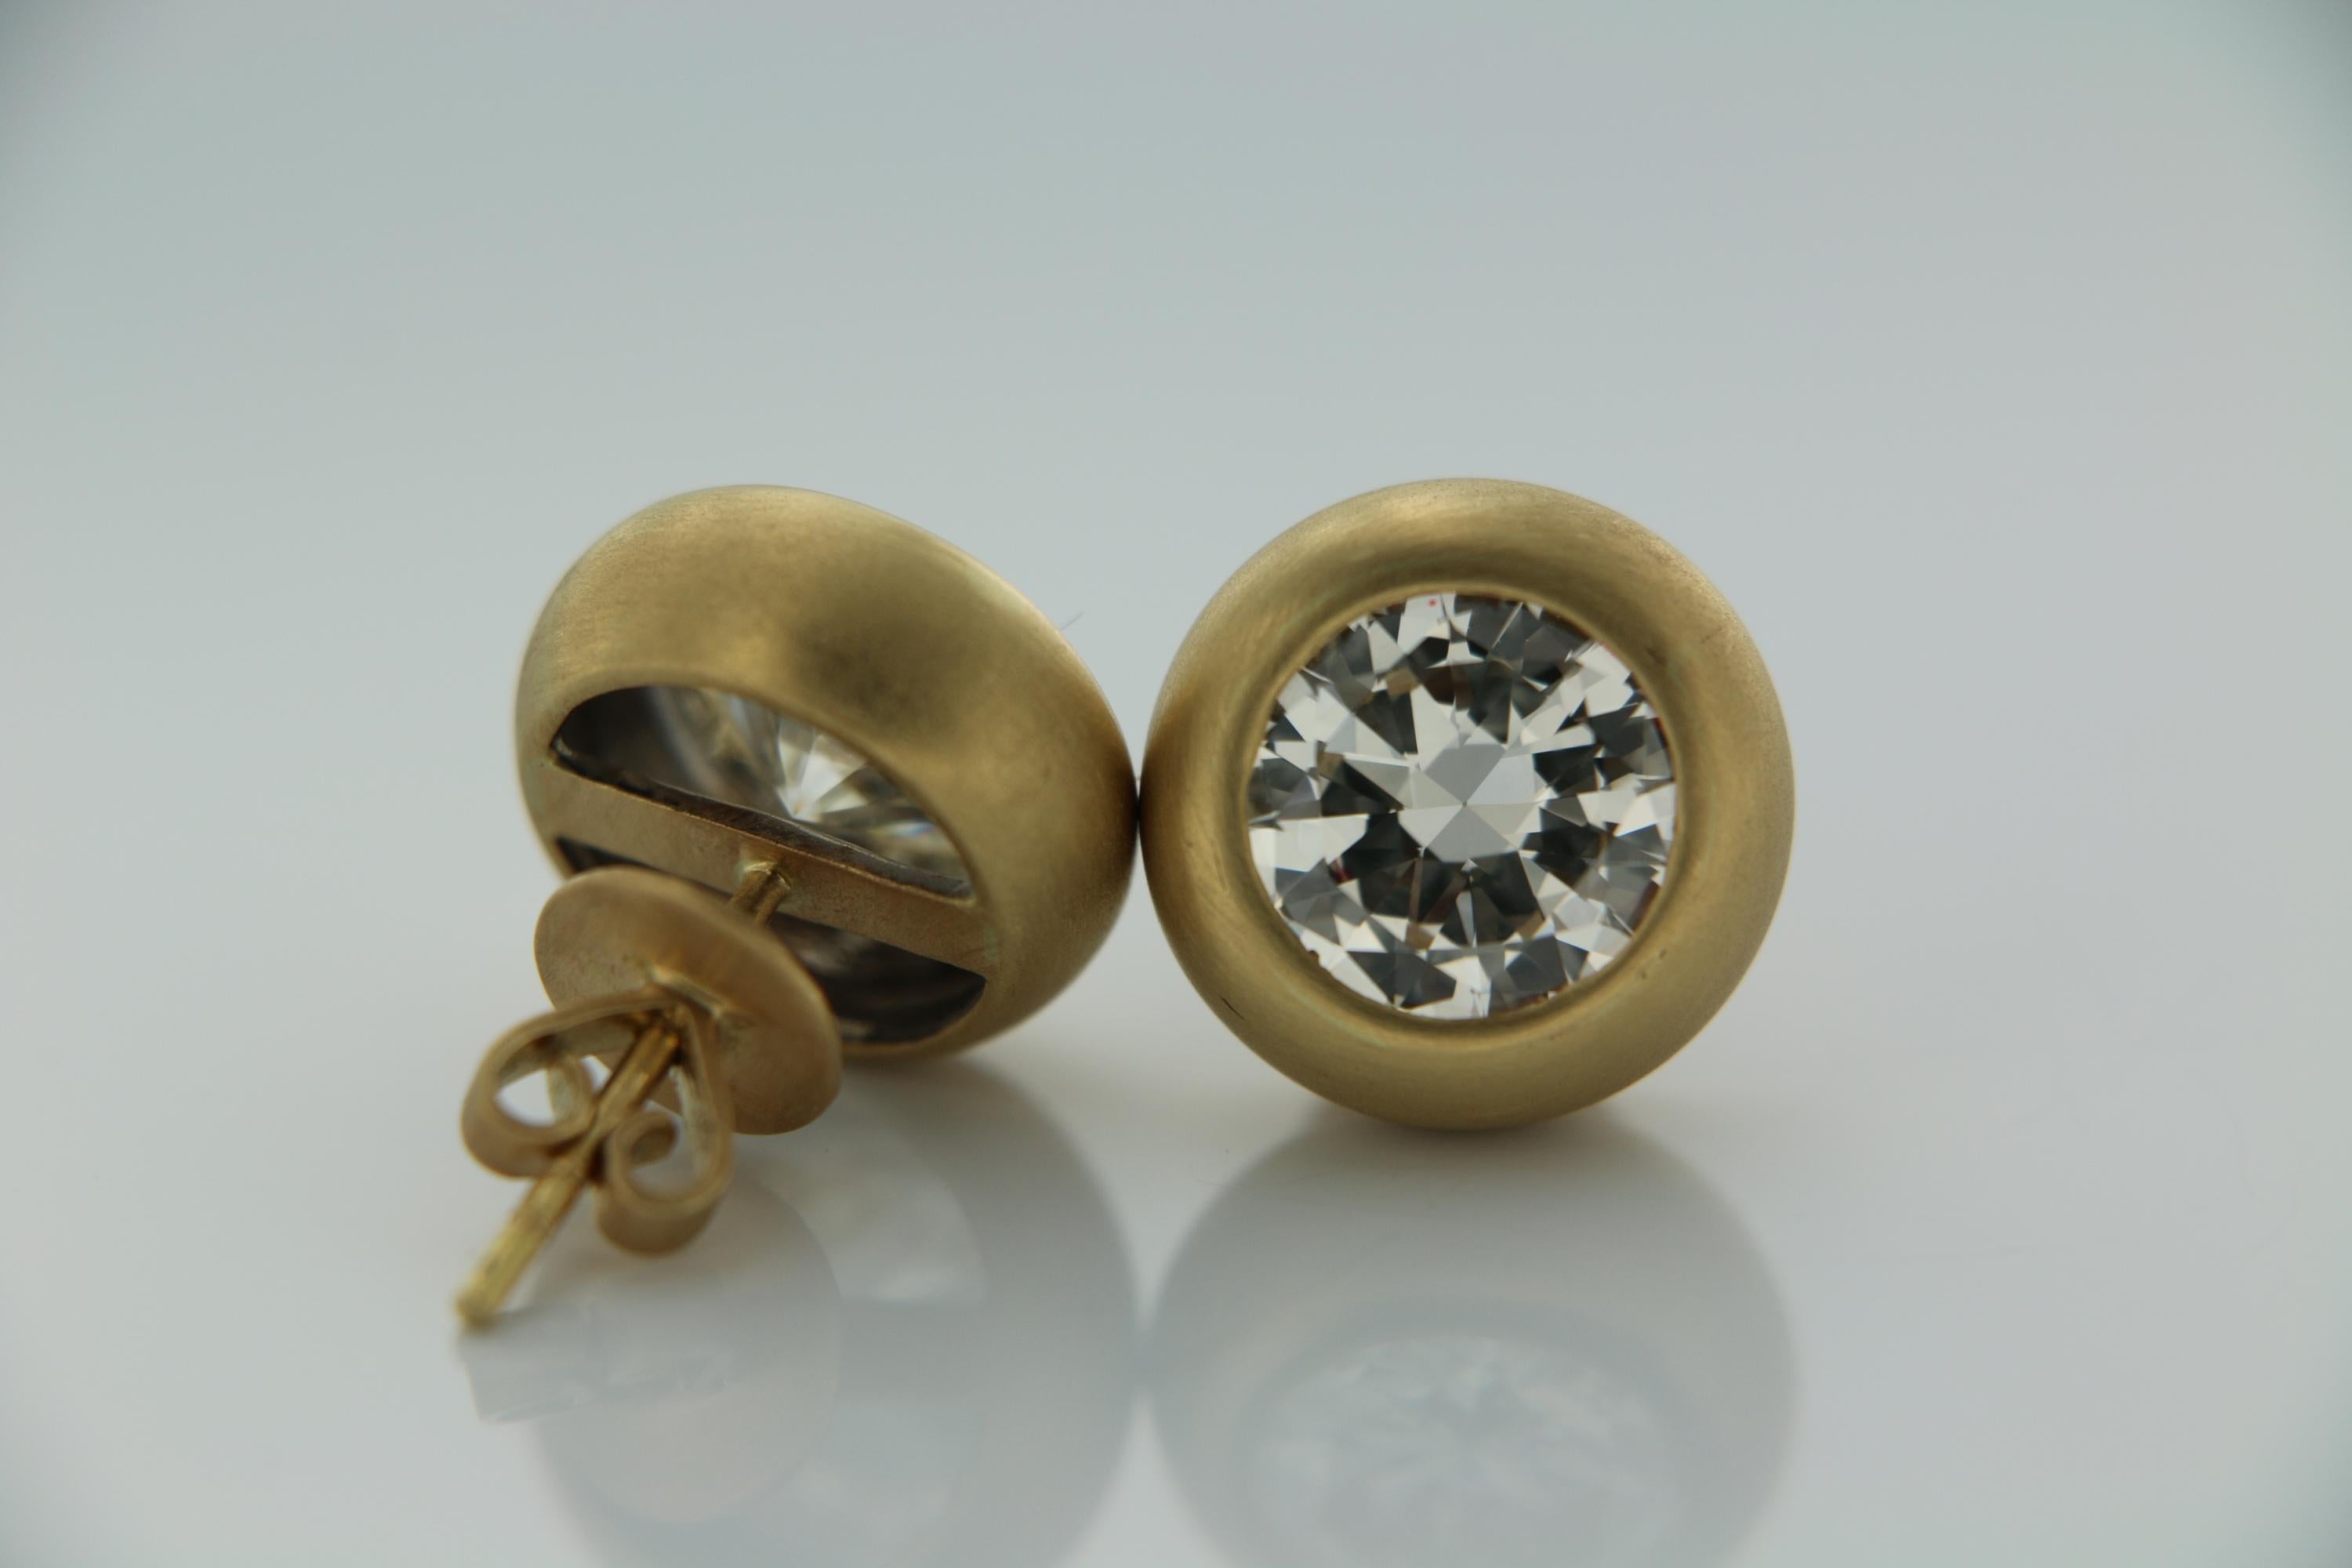 Round Cut 3.66 Carat Natural Diamond Solitaire Studs Earrings in 18 Karat Yellow Gold